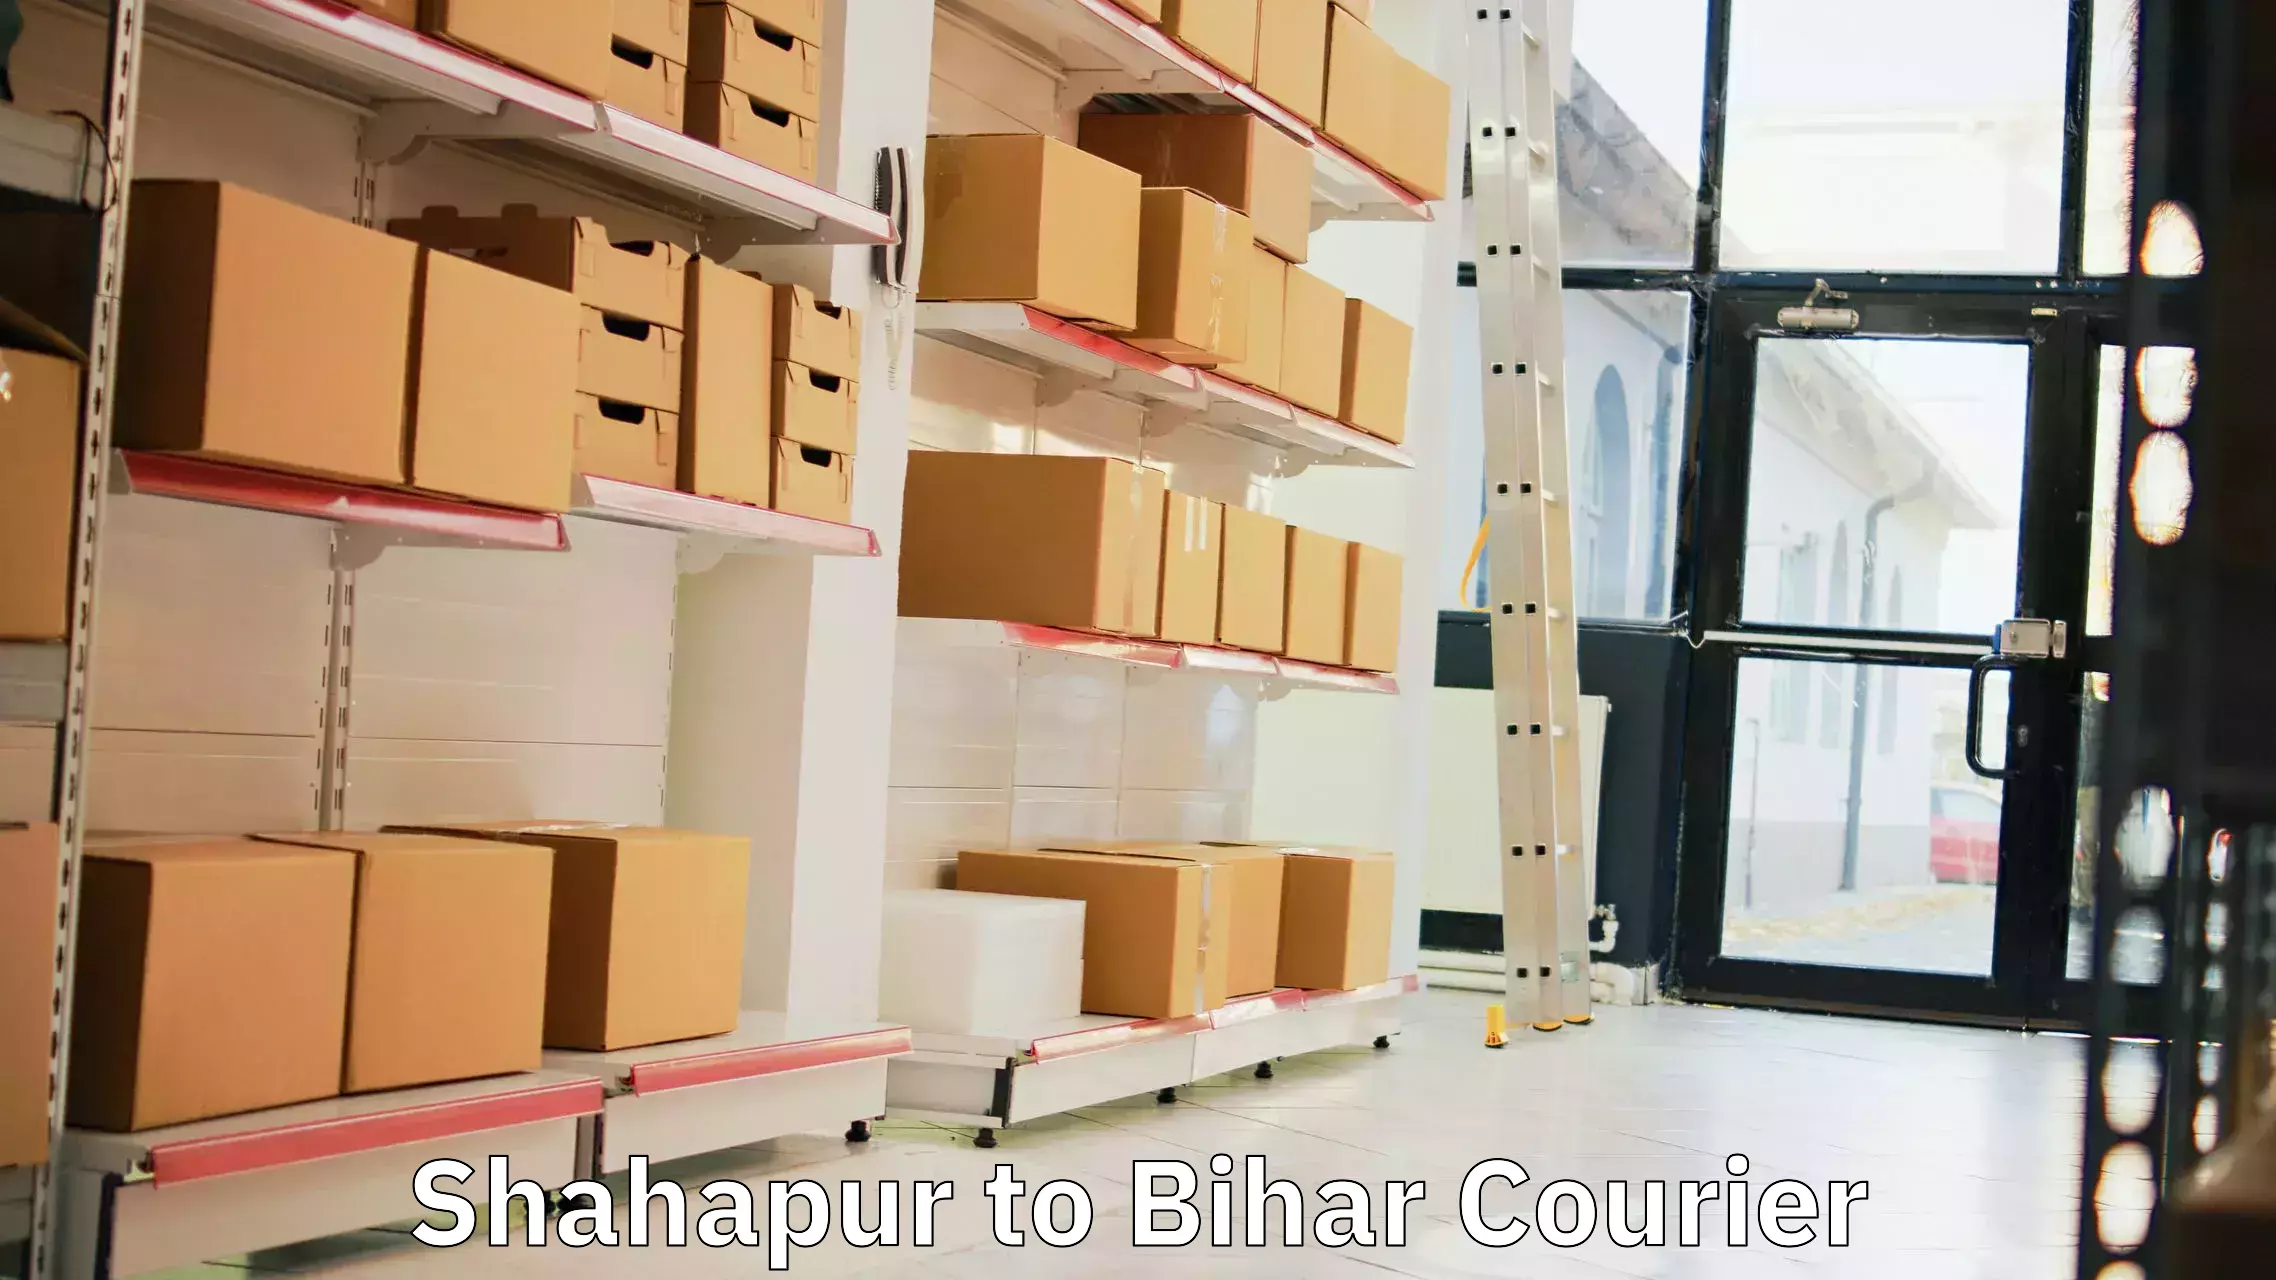 Holiday shipping services in Shahapur to Bihar